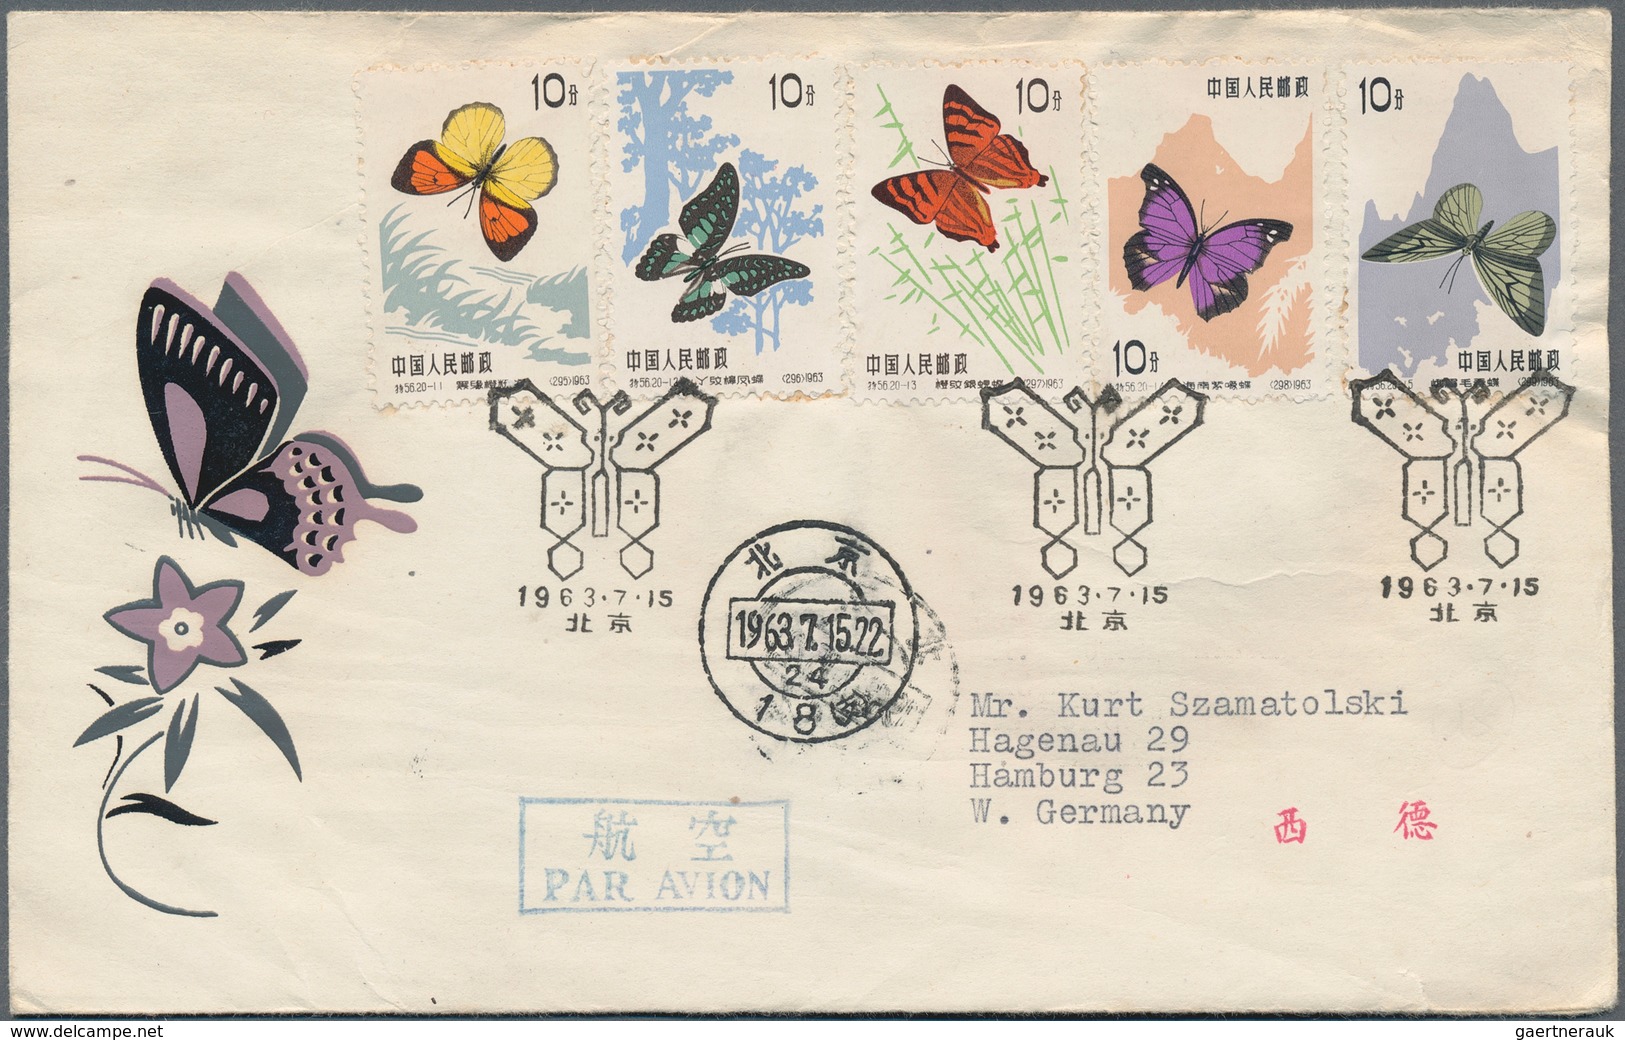 25790 Thematik: Tiere-Schmetterlinge / animals-butterflies: 1885/2005, USA and others. Nice little collect